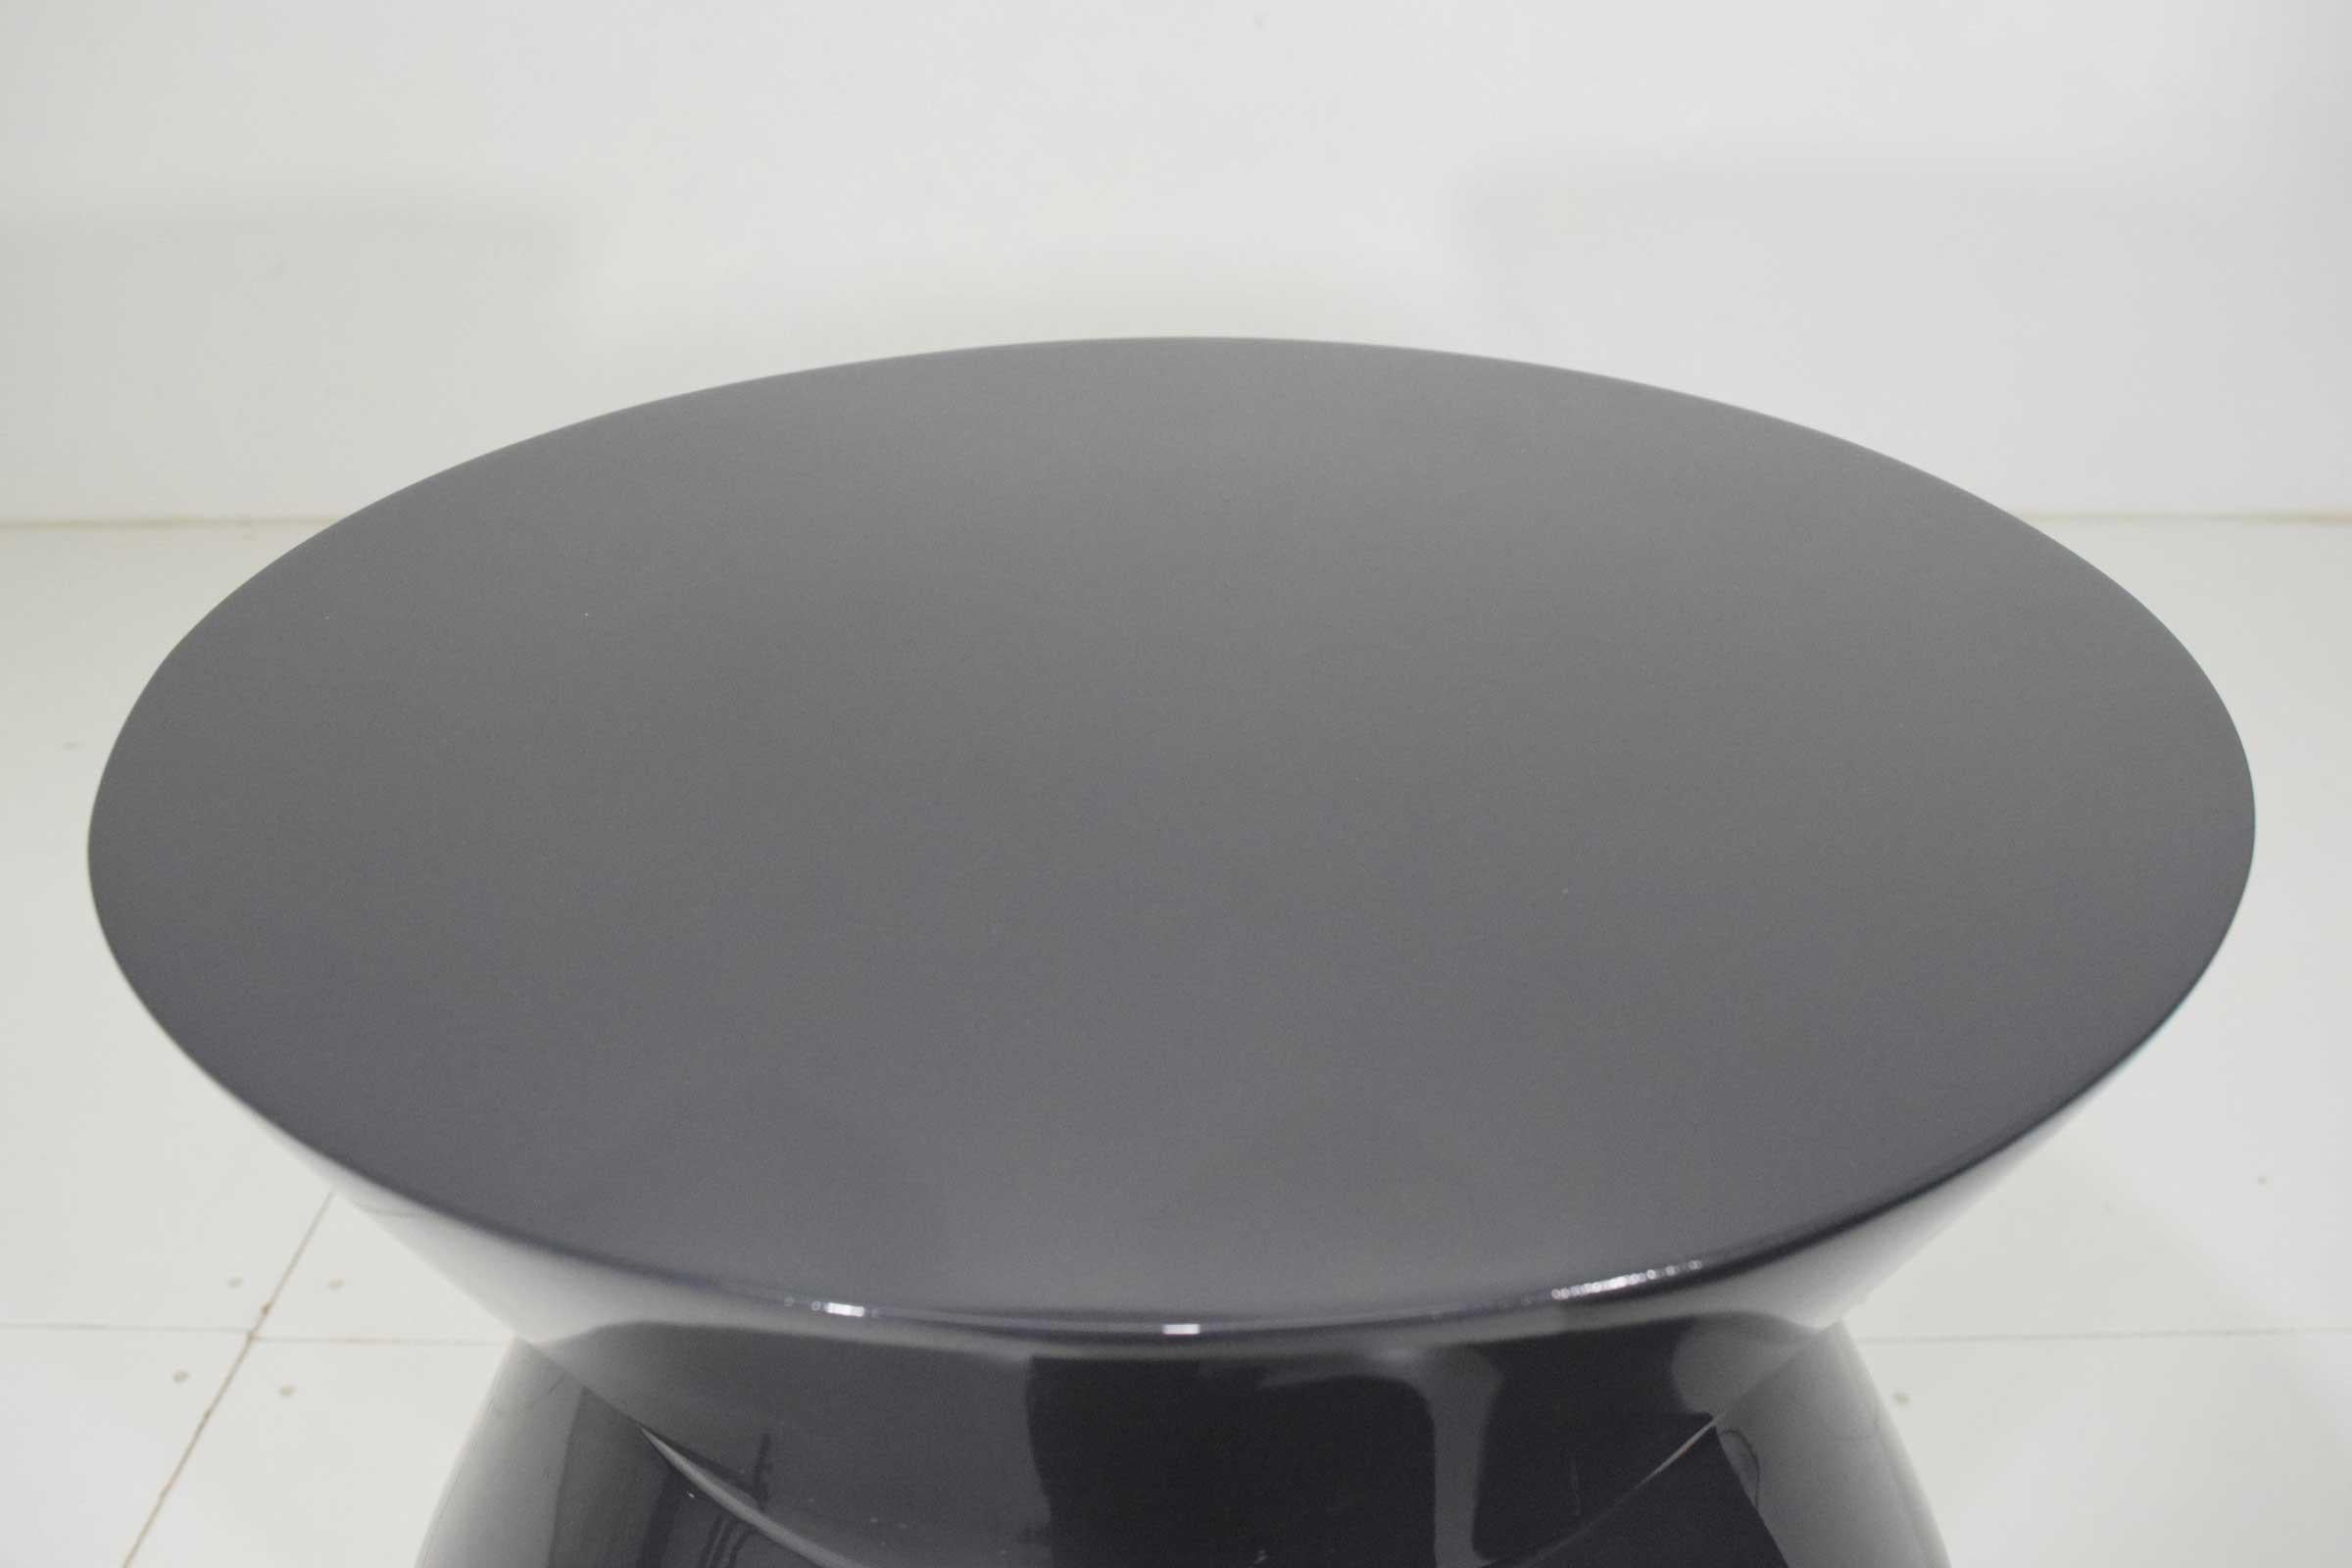 Newly refinished in a dark grey lacquer, this table is substantial. High gloss finish.